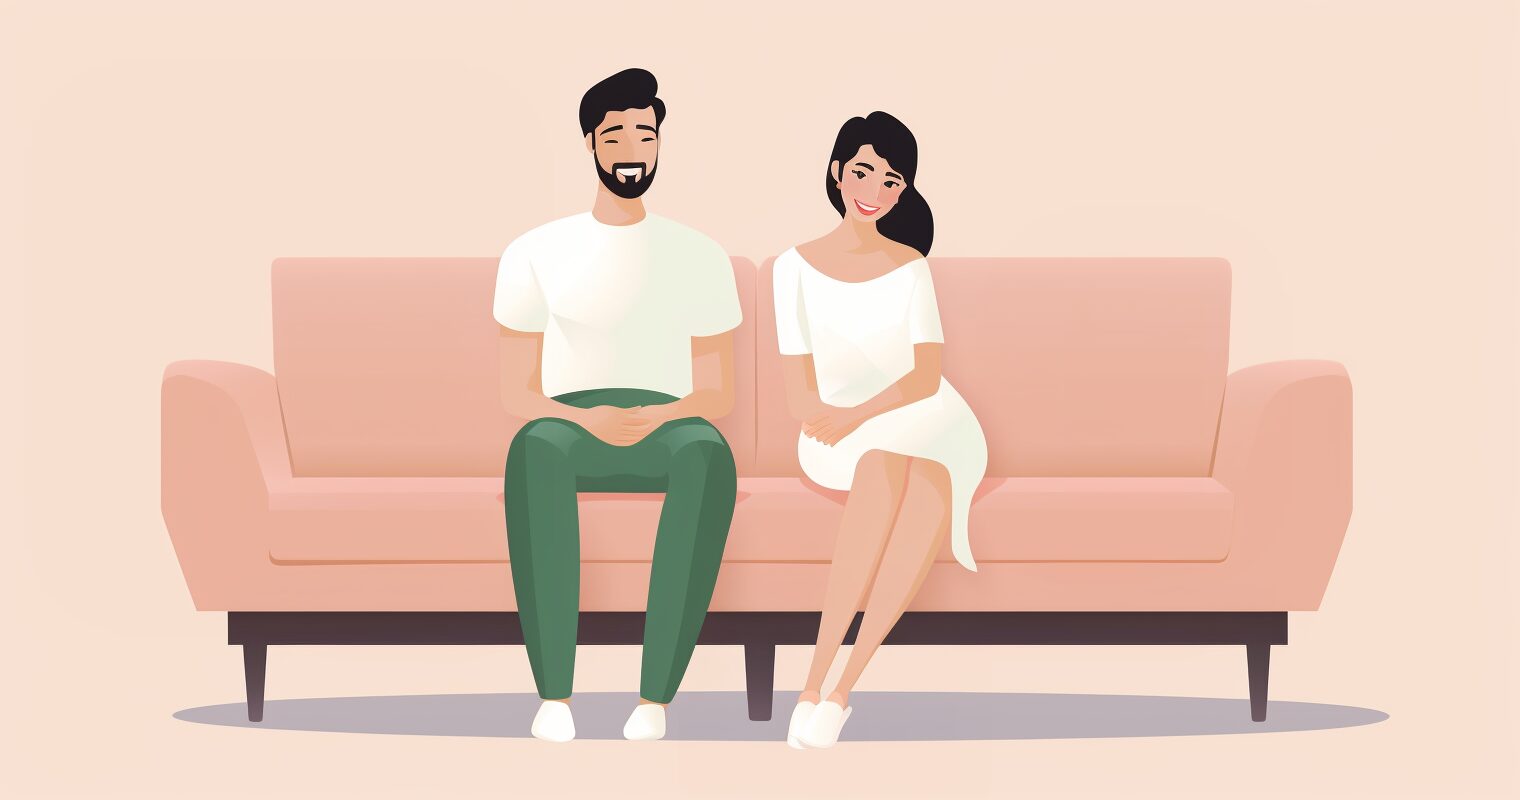 A man and a woman sitting on a couch.